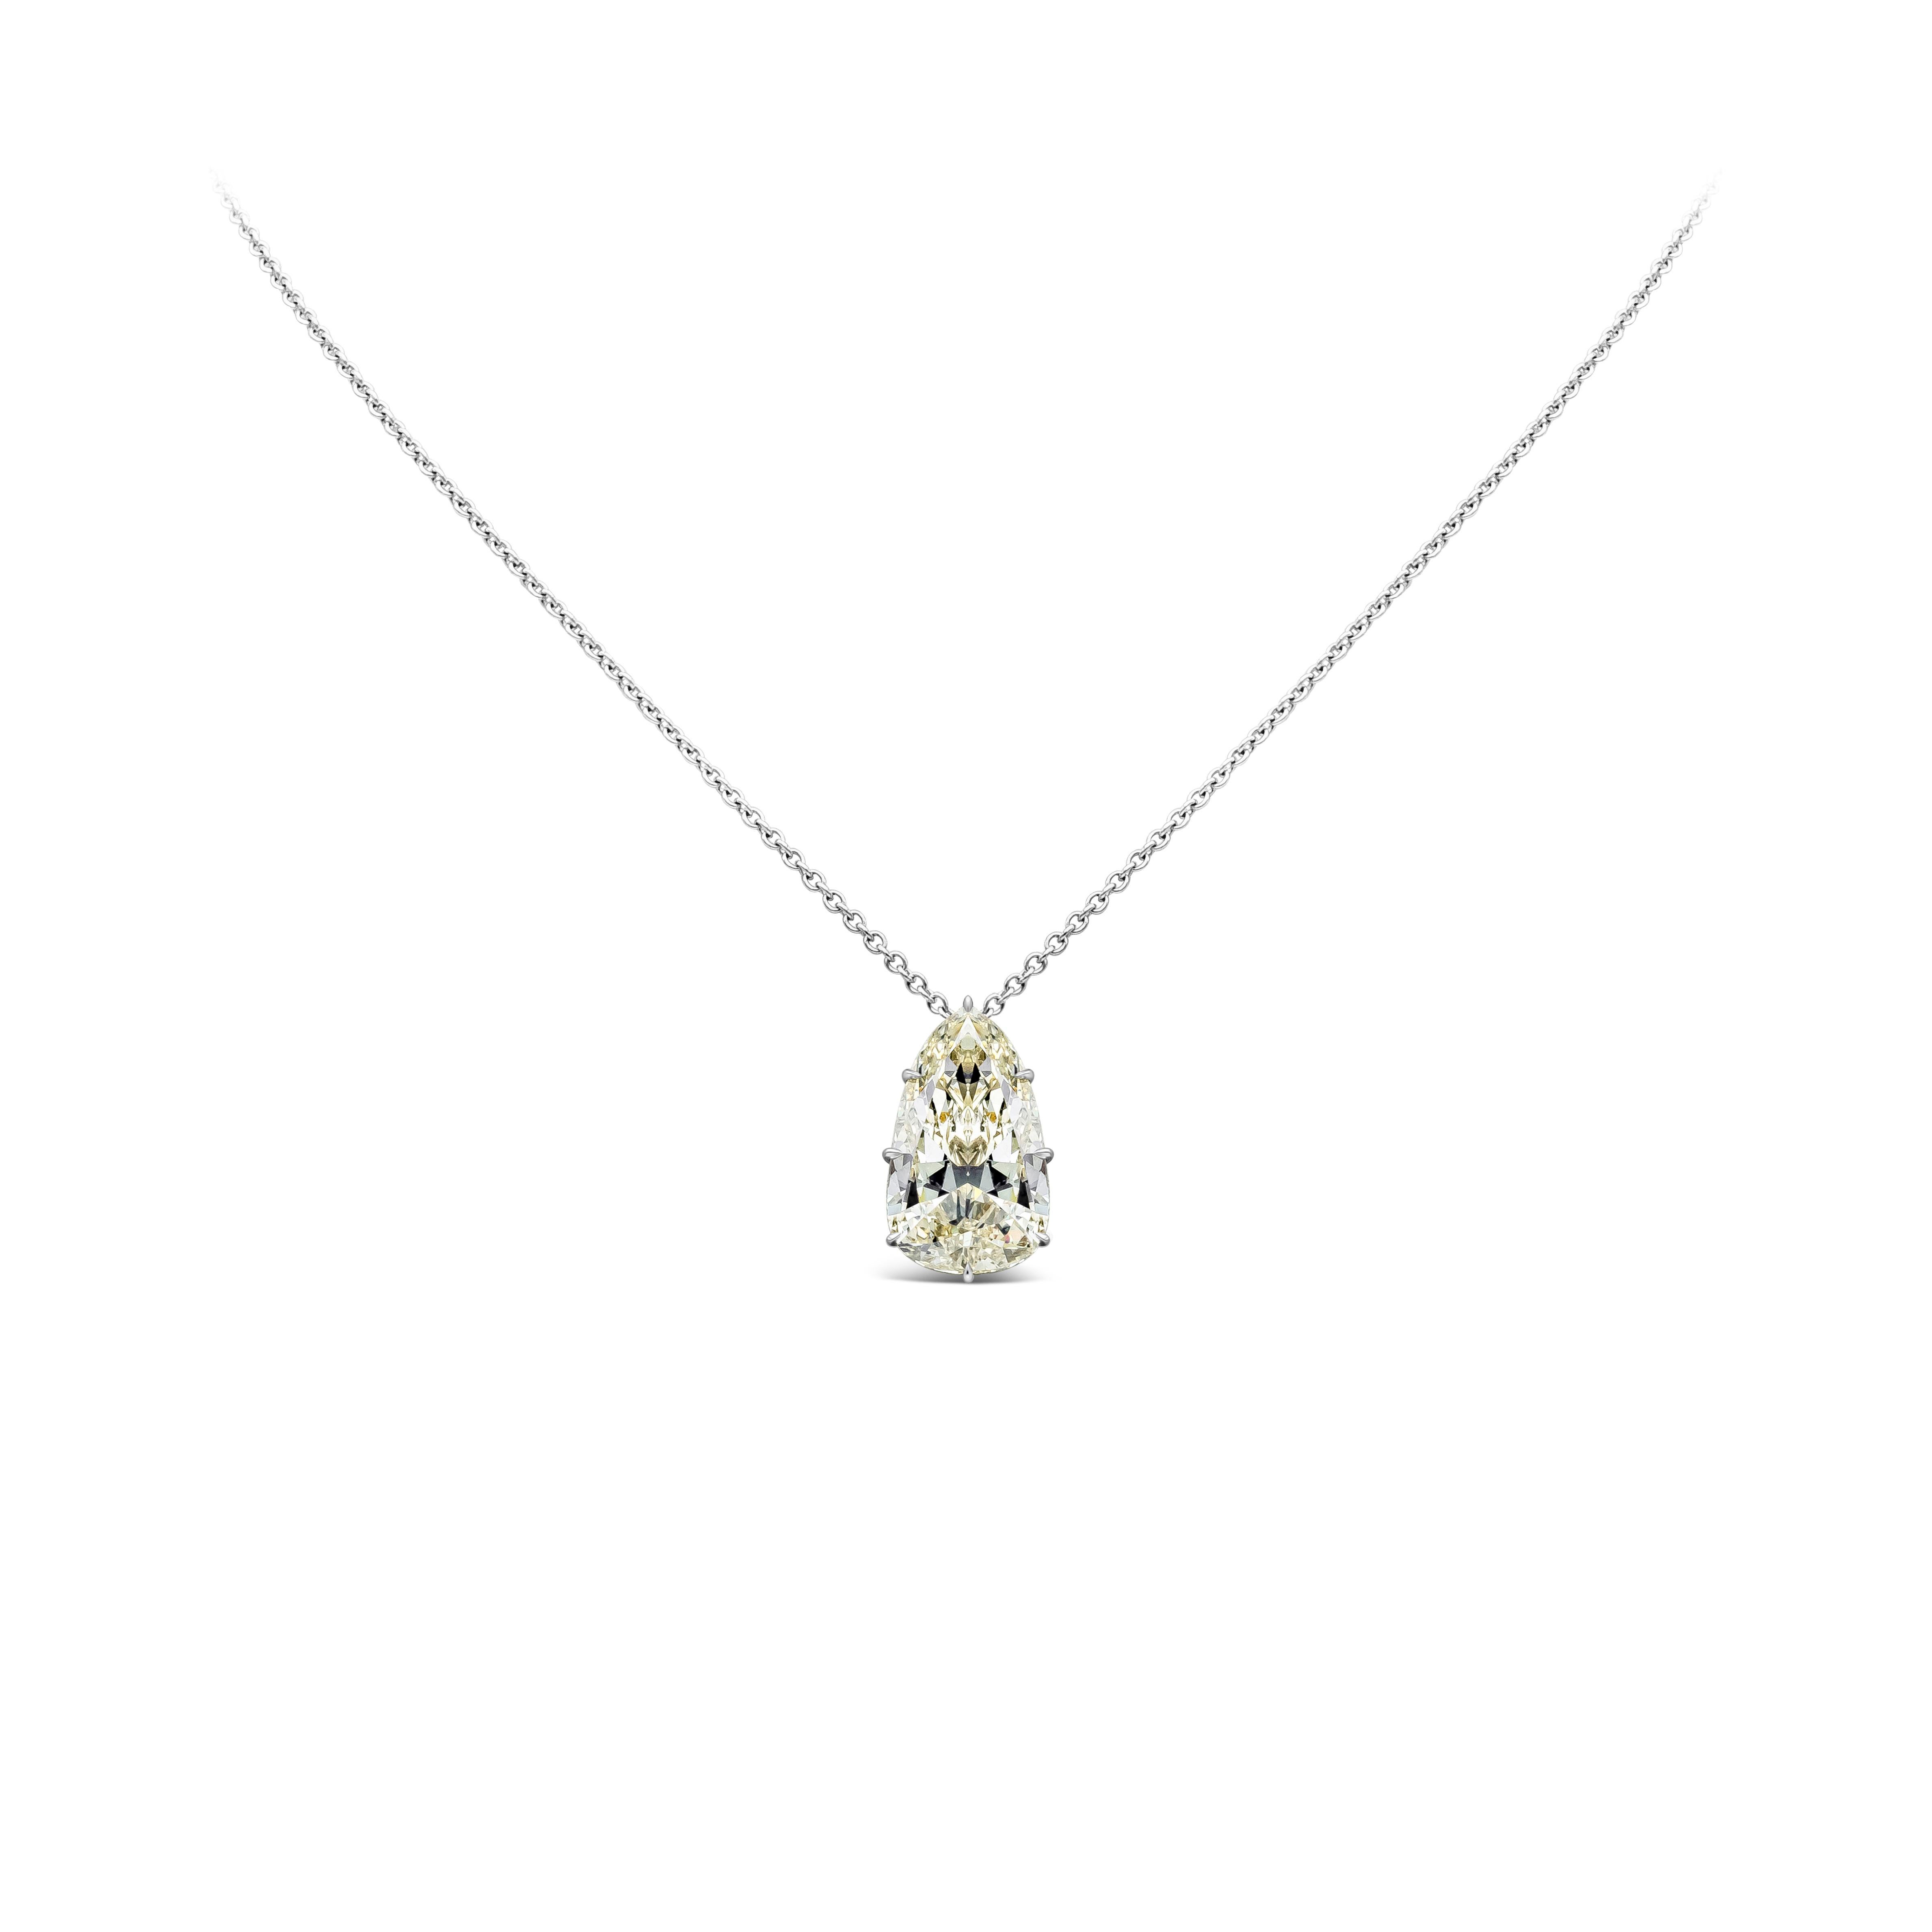 A bold solitaire pendant necklace showcasing a 9.10 carat pear shape diamond, K Color and VVS2 in Clarity. Set in 8 prong, Made with Platinum. 18 inches in Length